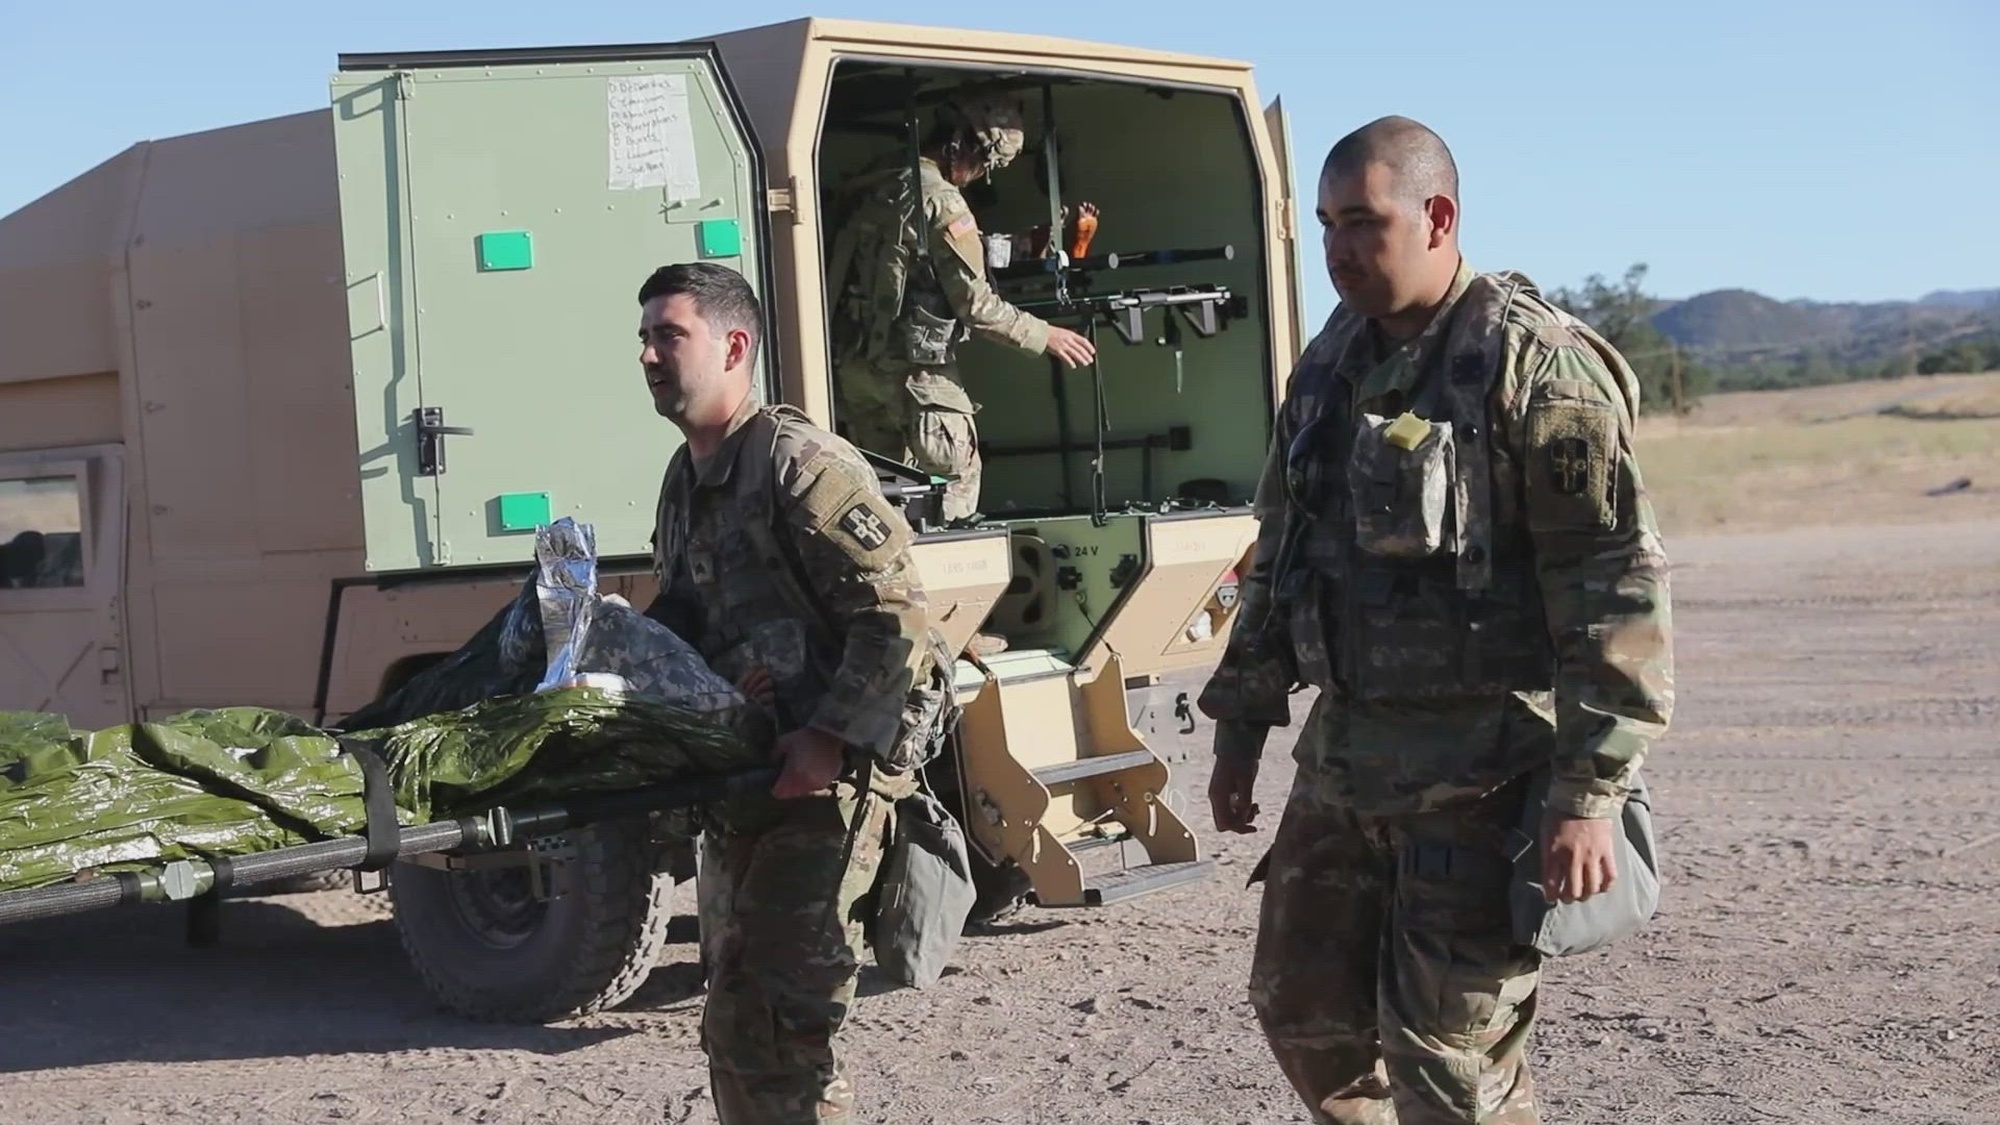 Maj. Brian Eberhardt discusses his role as a scenarios officer for Global Medic Aug. 6-20, 2022 at Fort McCoy, Wisc. He also expands on how the Global Medic exercise prepares service members to face real-life situations. (Video by Sgt. Vontrae Hampton)